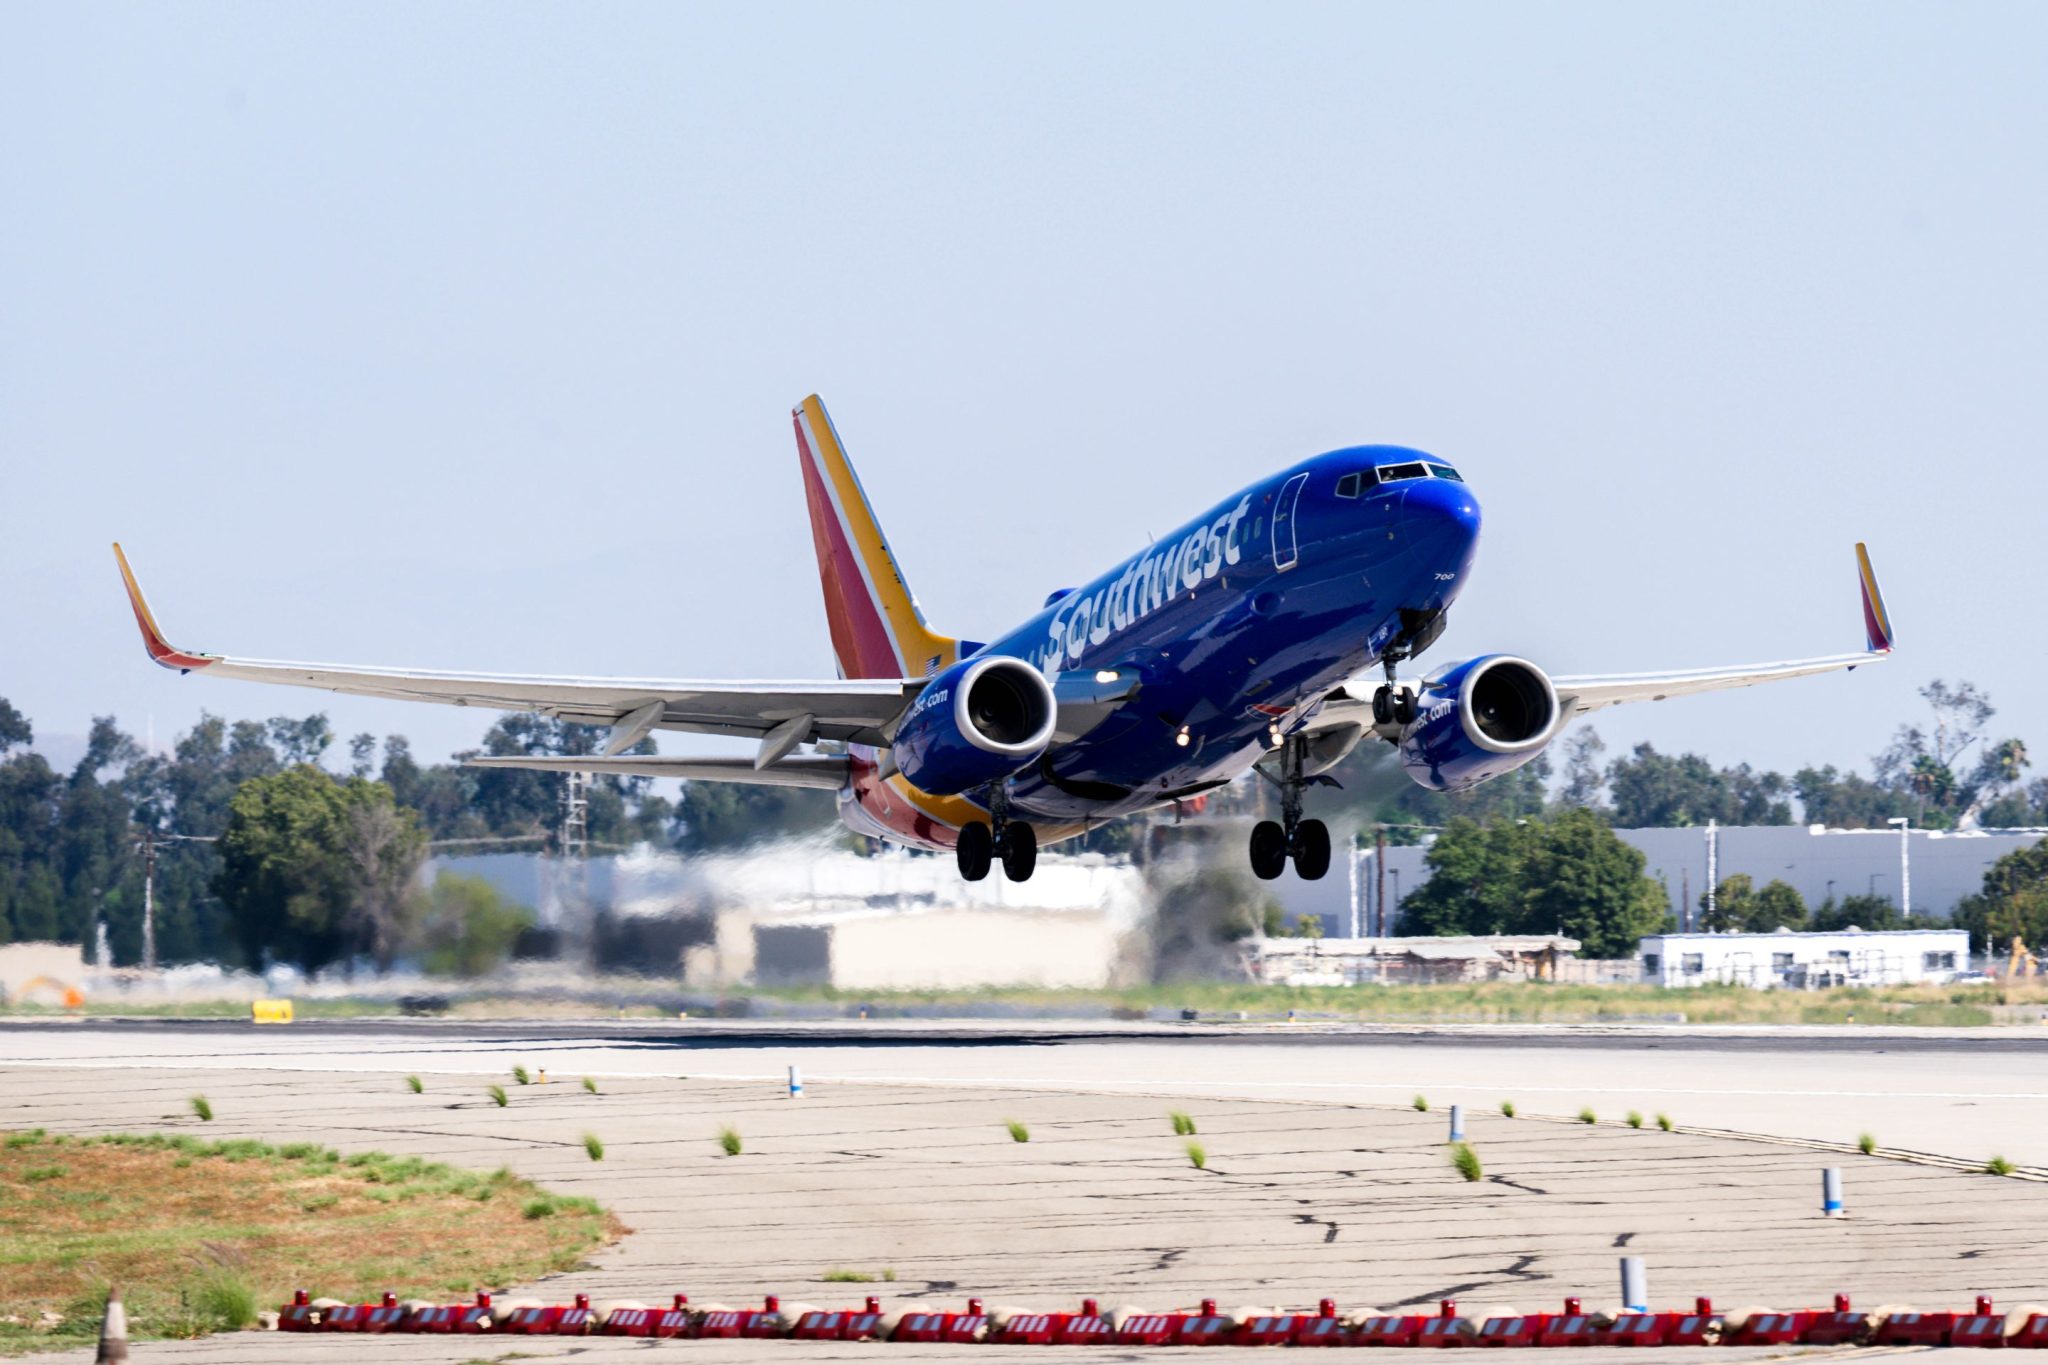 New welcome offer for Chase Southwest Cards includes Companion Pass for a year